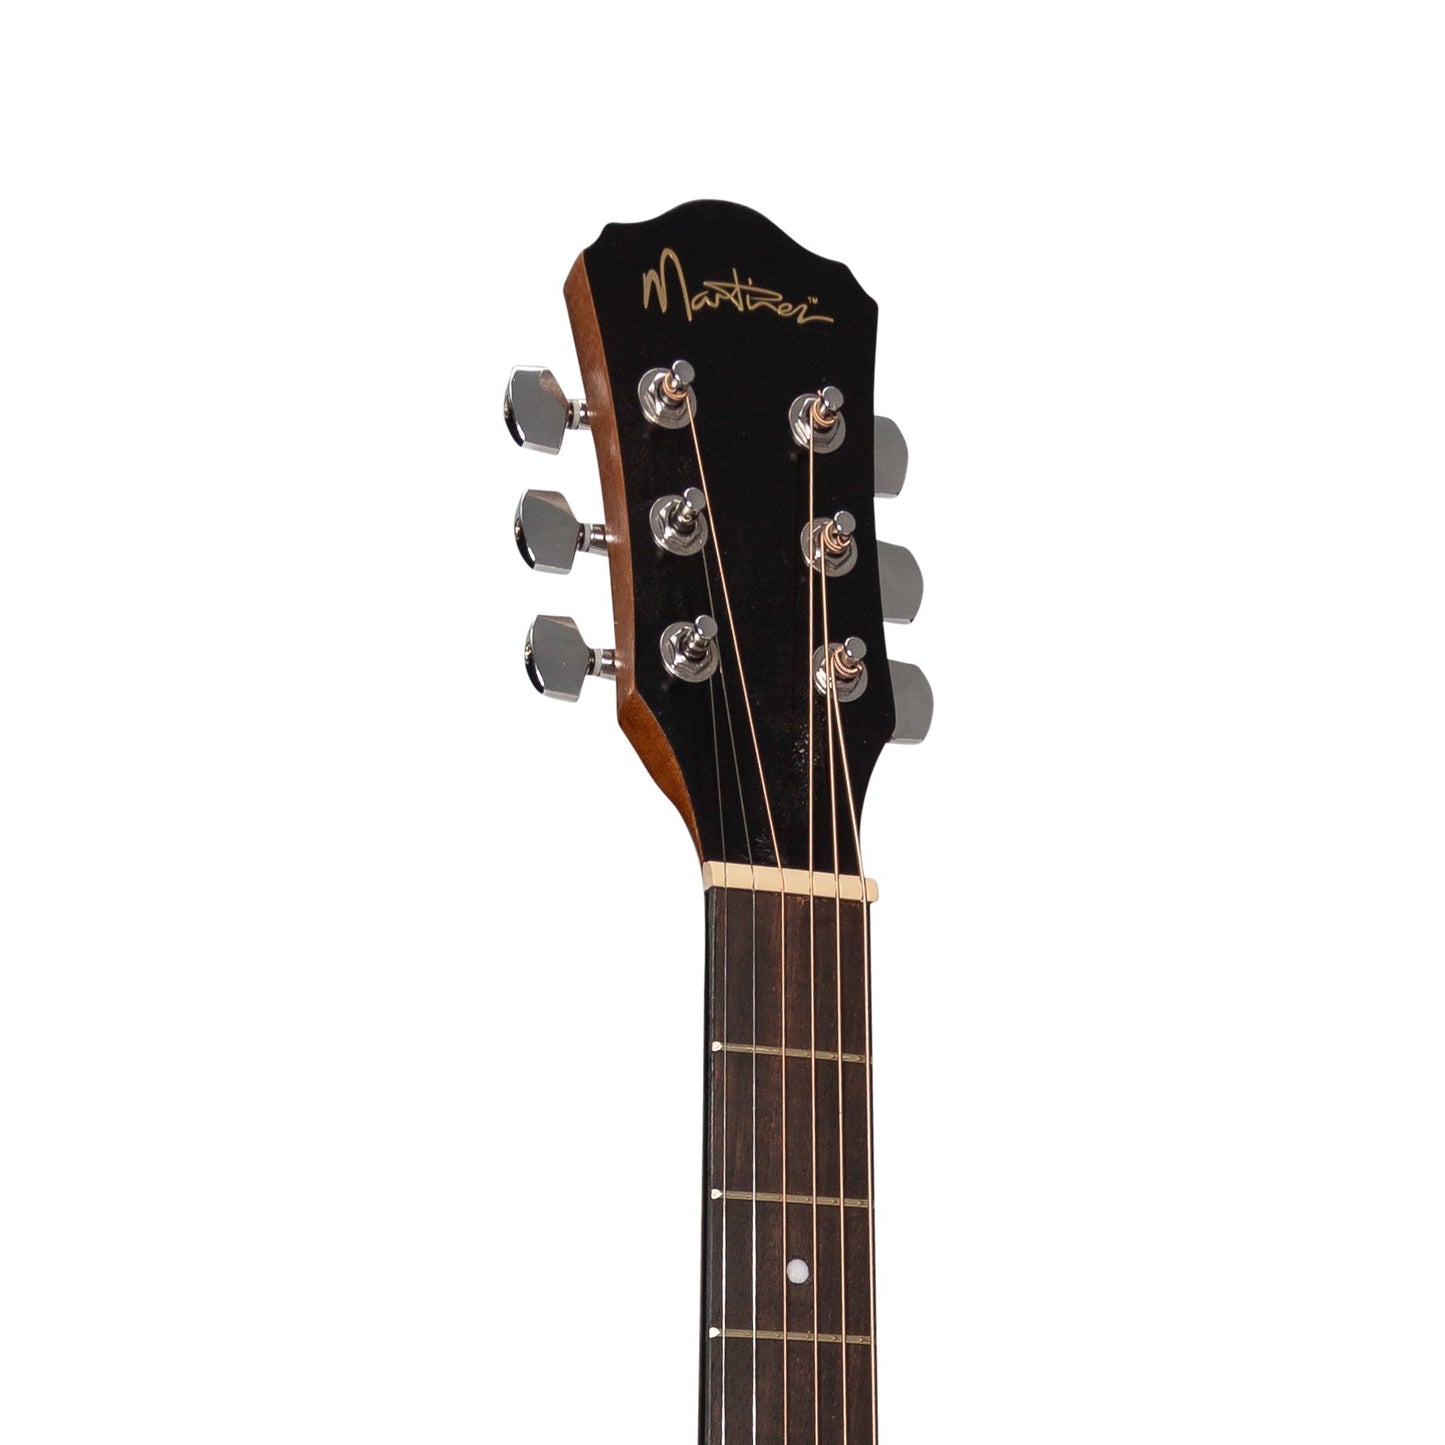 Martinez Left-Handed '41 Series' Folk Size Cutaway Acoustic-Electric Guitar Pack (Mahogany)